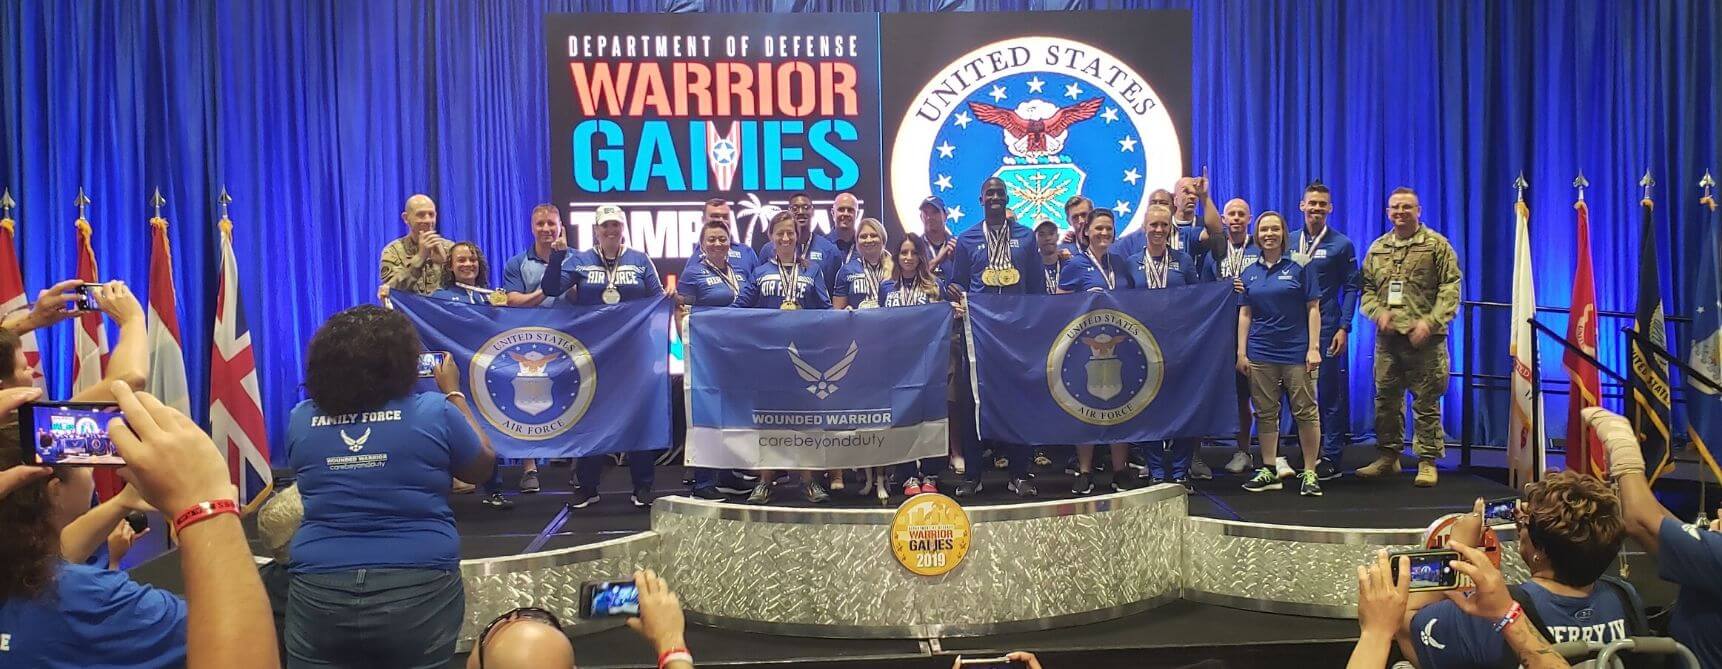 4 DOD Warrior Games Sporting Event